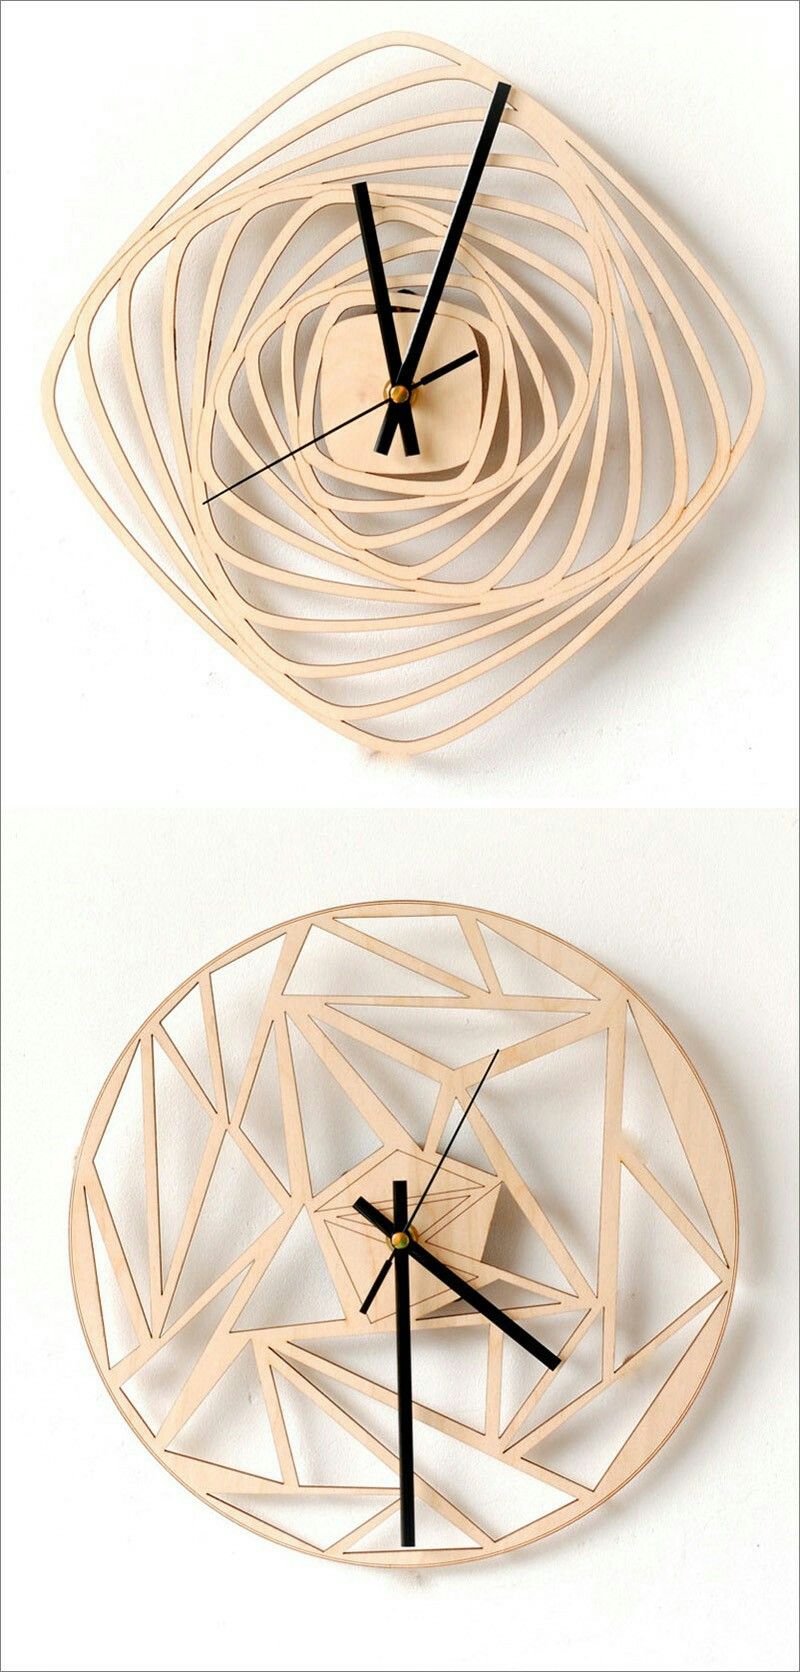 Timeless Elegance: Personalized Clocks for Your Home